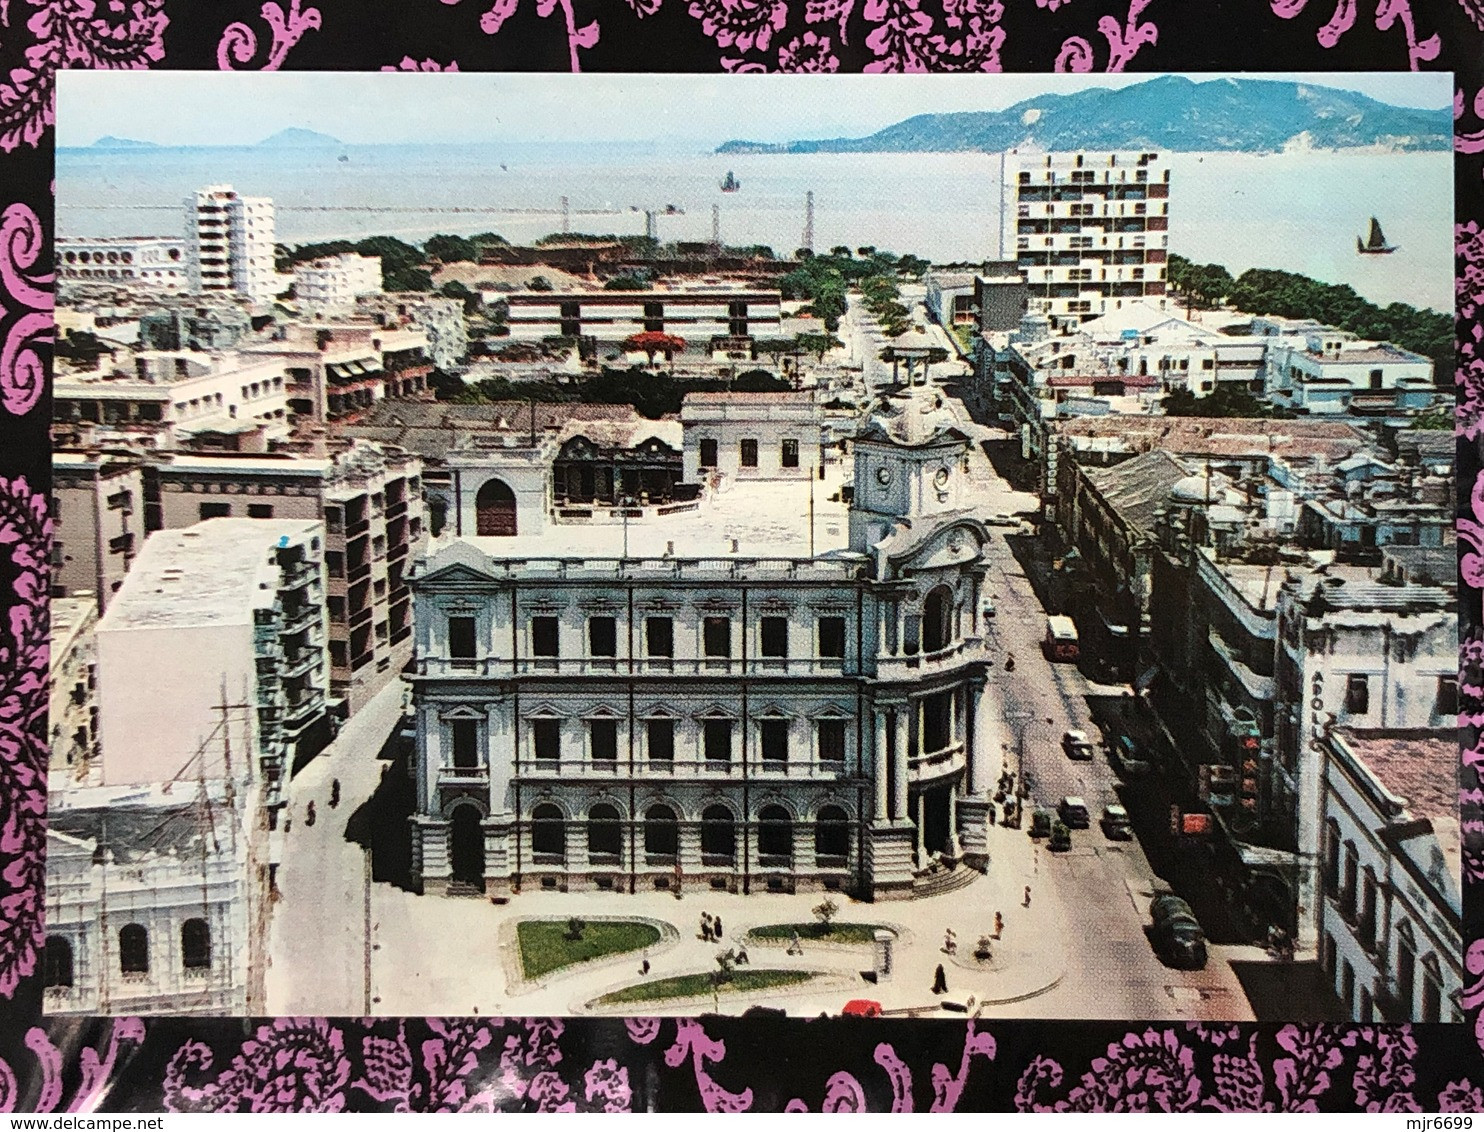 MACAU 1960'S GENERAL POST OFFICE & BUILDING THE CASINO LISBOA AT THE TOP END OF THE PHOTO, RARE - Macau